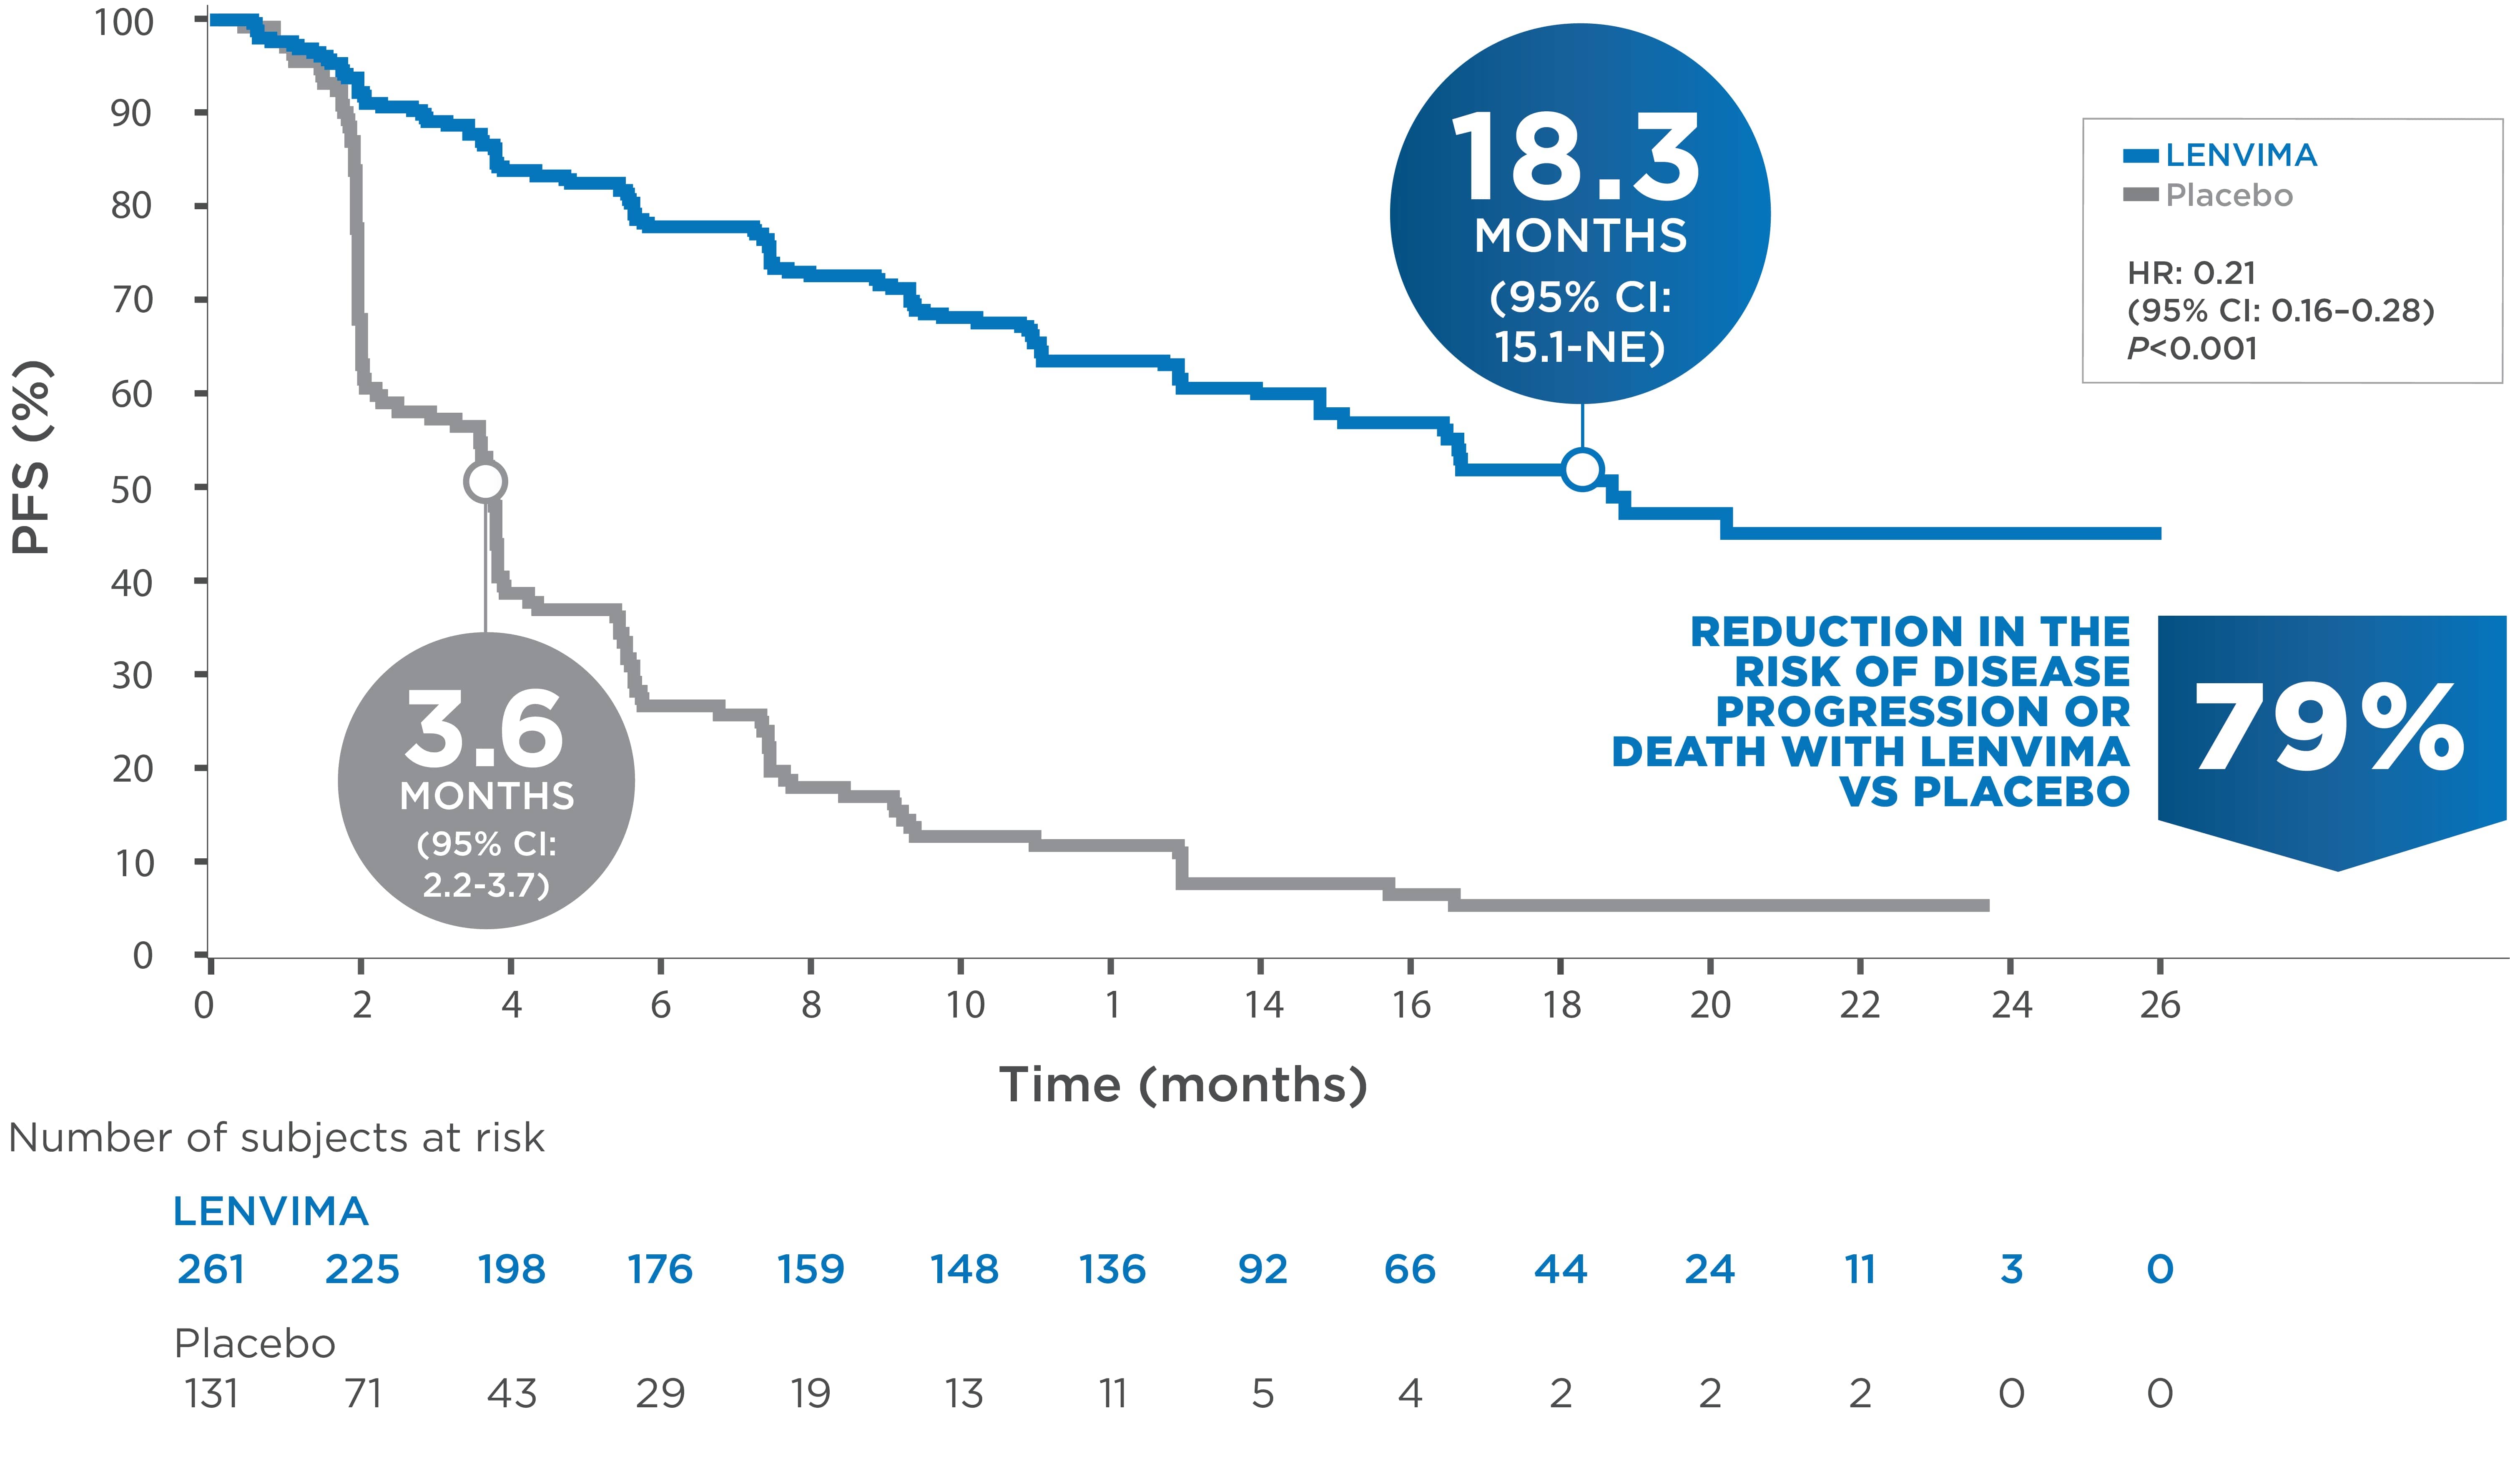 LENVIMA achieved median progression-free-survival of 18.3 months vs 3.6 months with placebo in the SELECT trial.